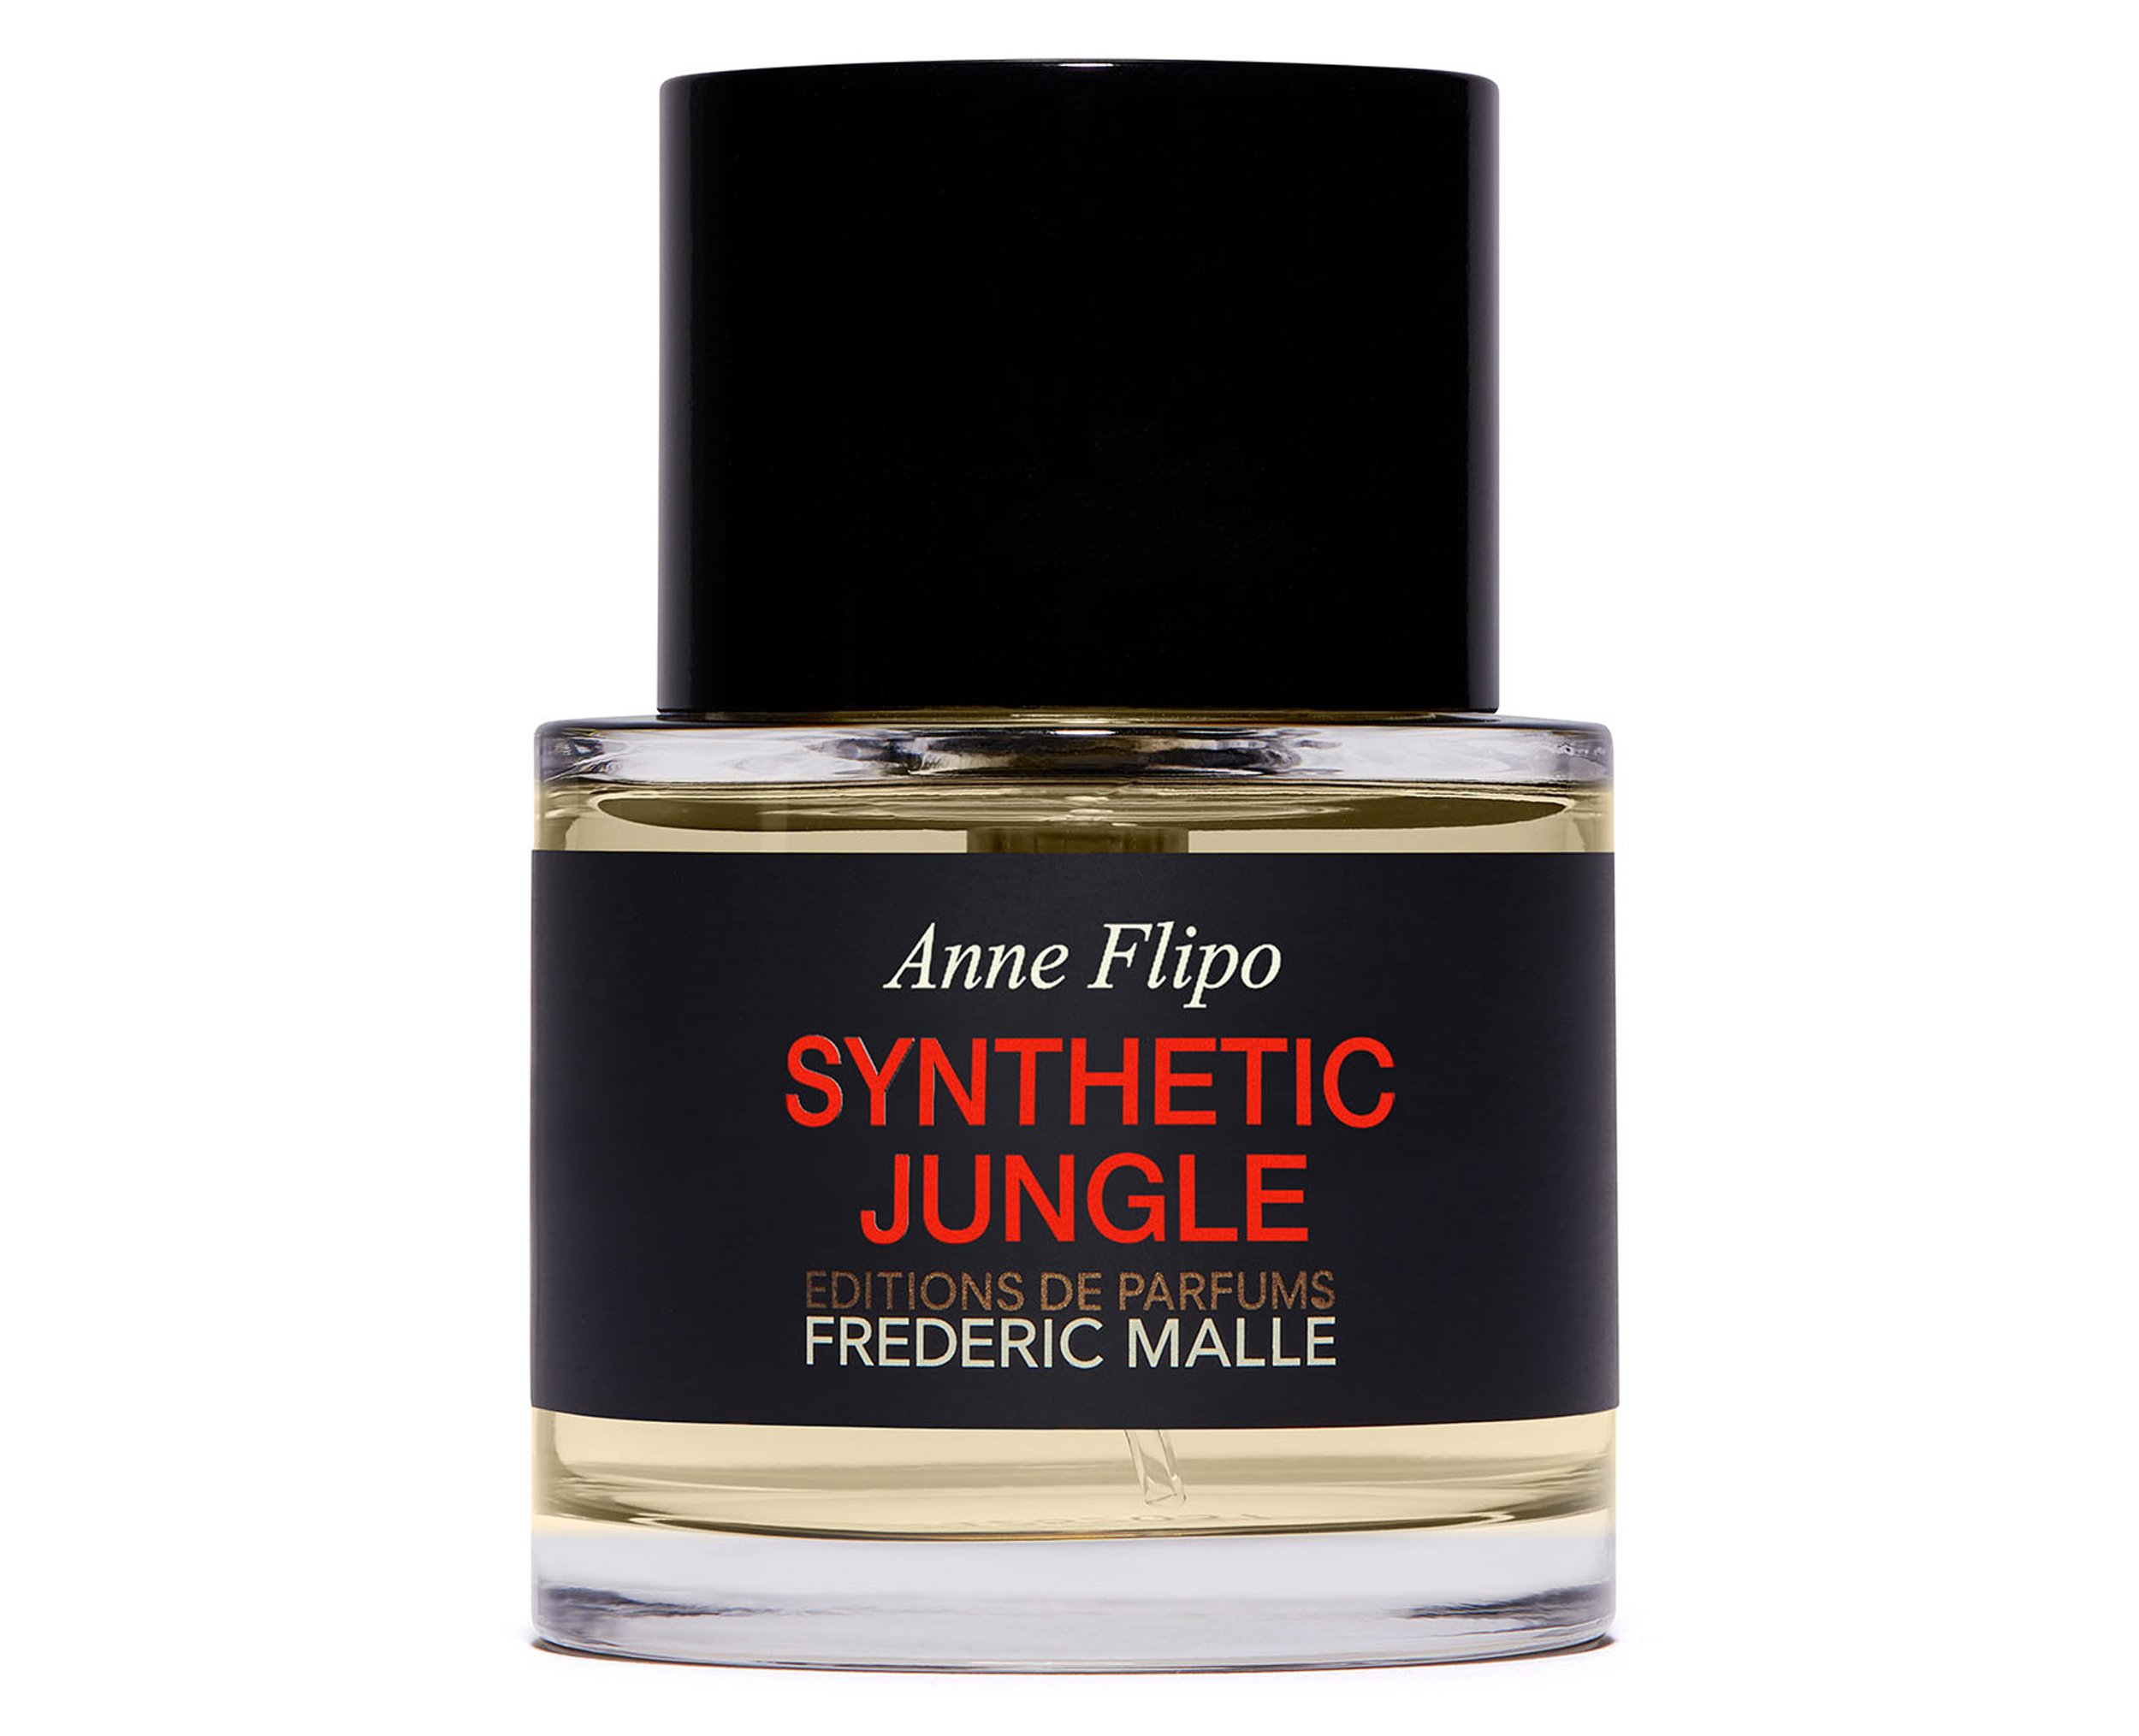 7. Frederic Malle Editions de Parfums Synthetic Jungle €162 for 50ml